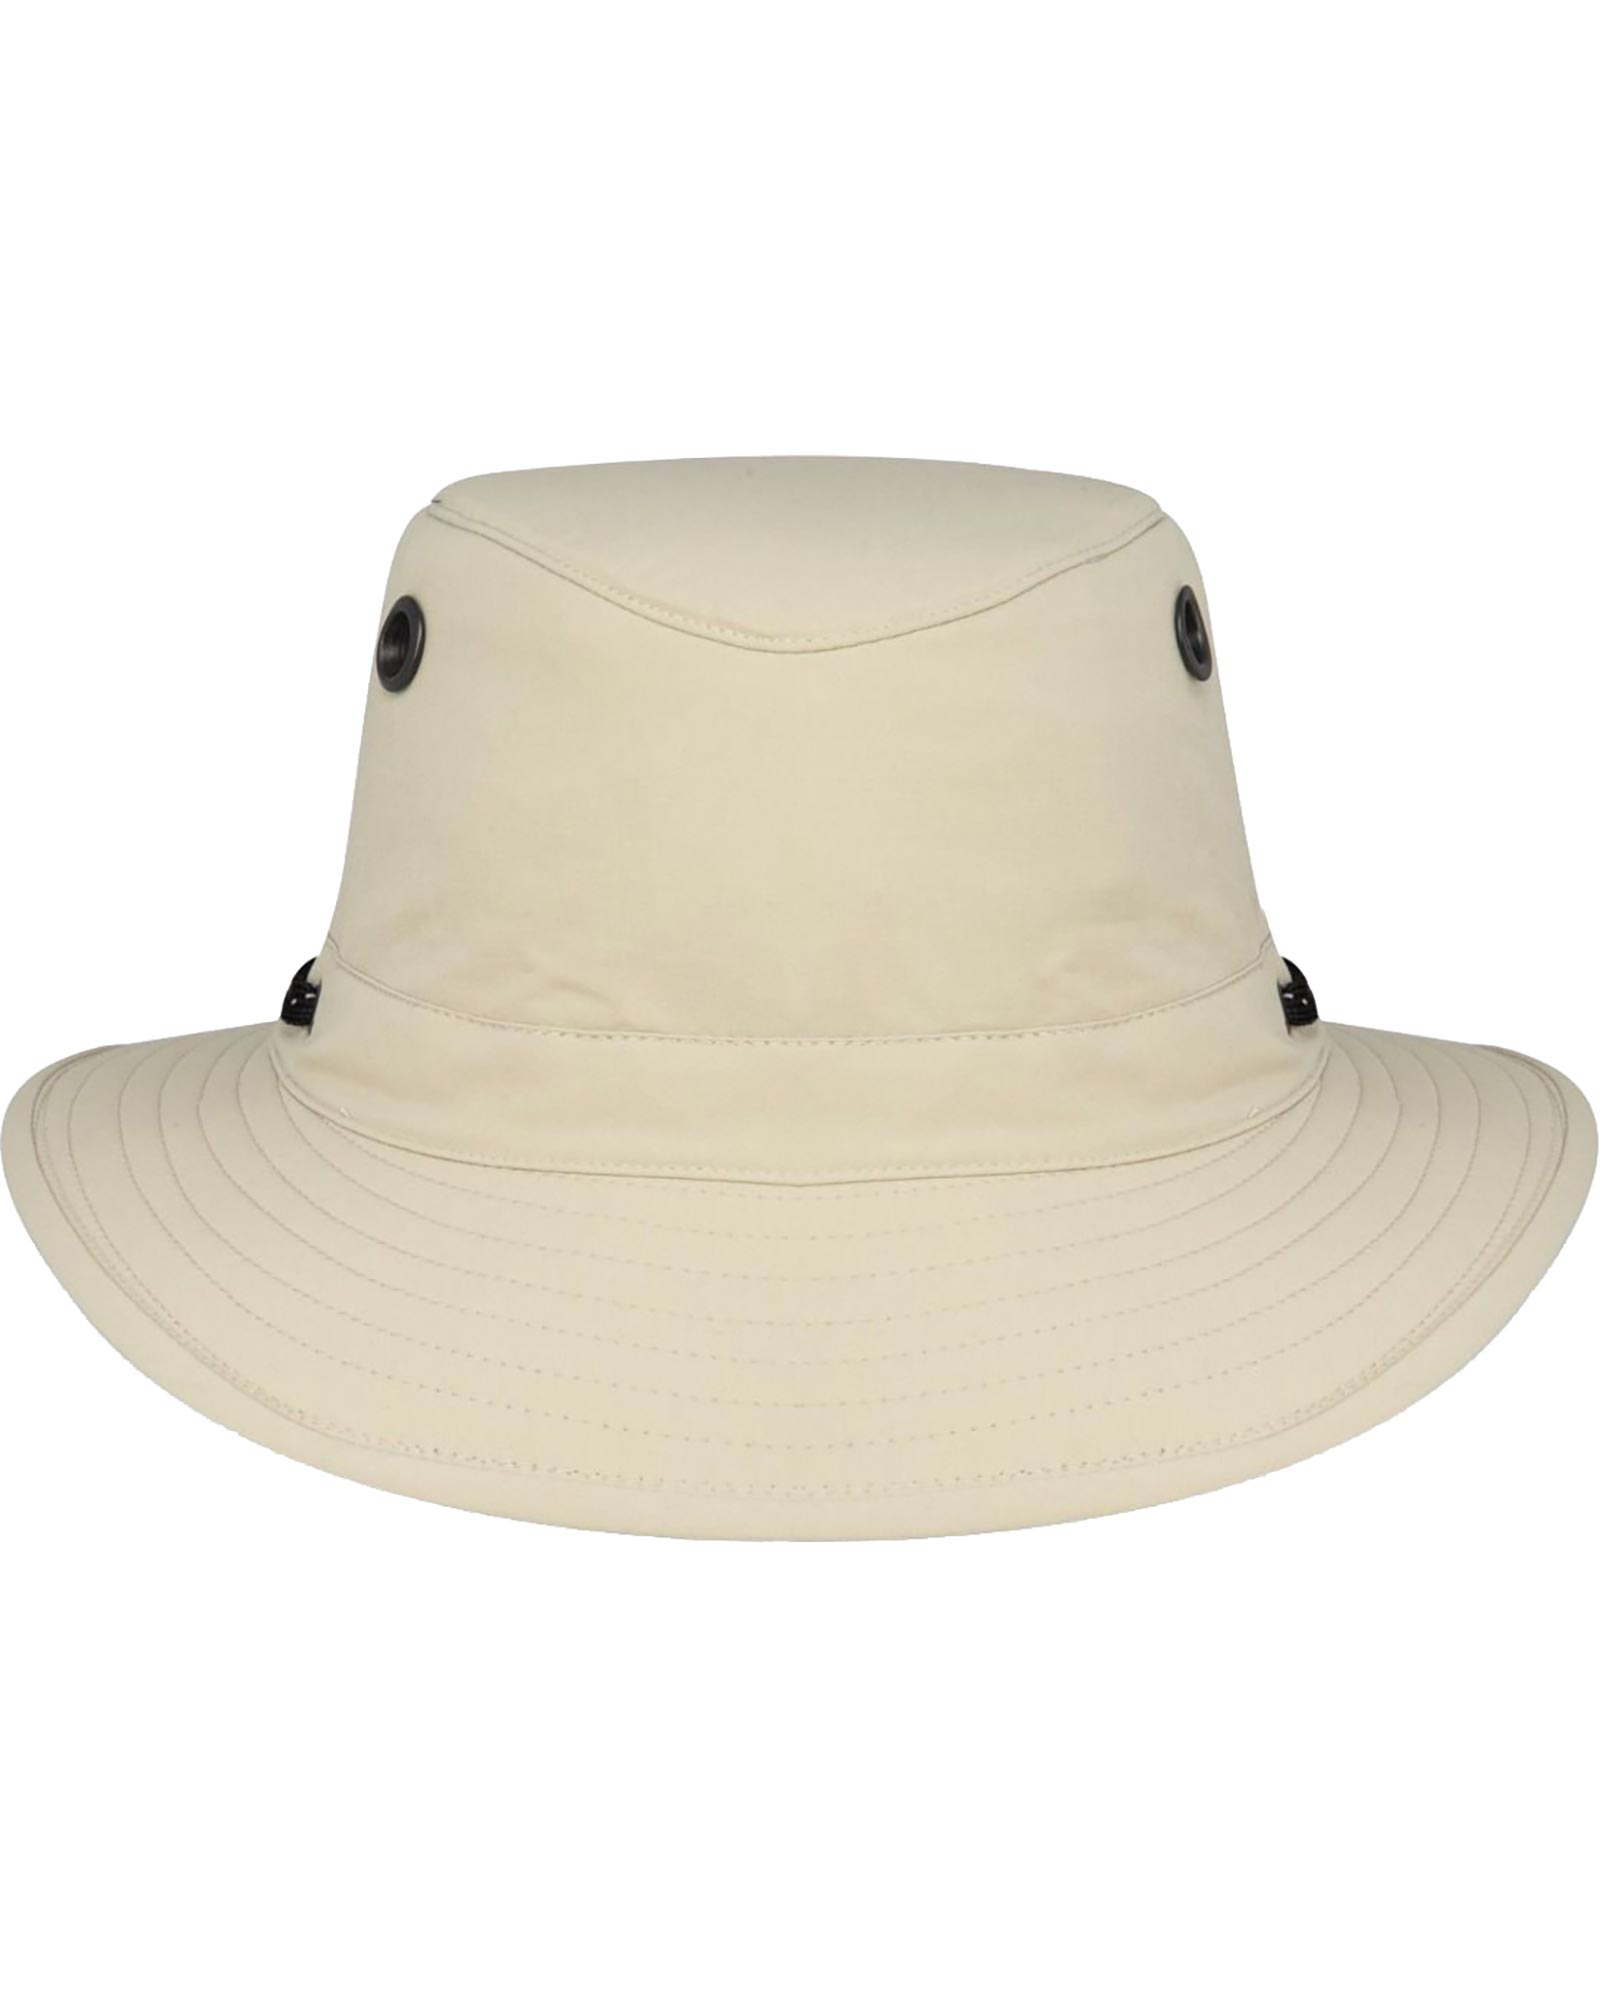 Tilley Breathable Bucket Hat - Stone/Taupe 7